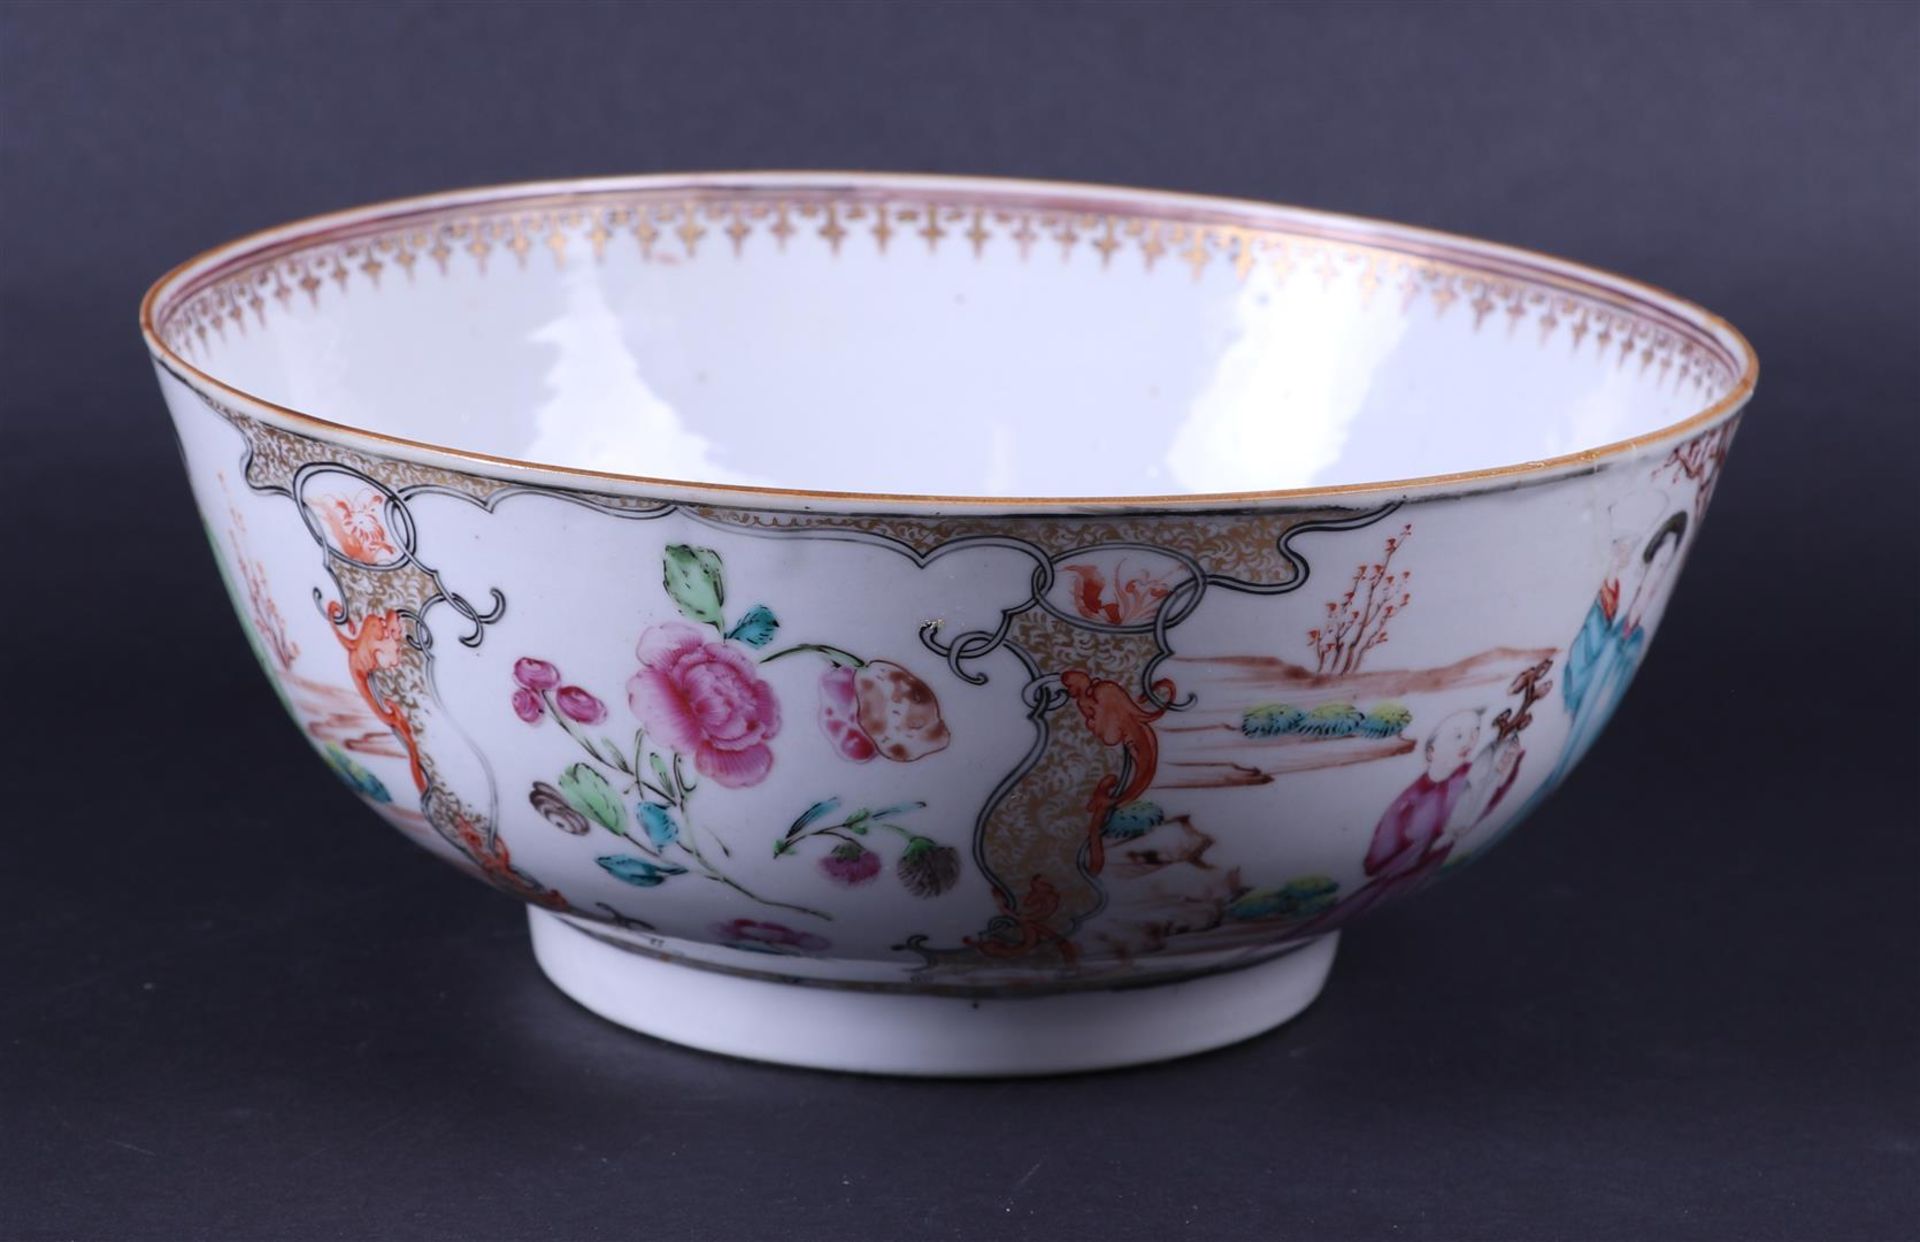 A large porcelain Chine de comande bowl decorated with various figures. China, 18th century. - Image 2 of 6